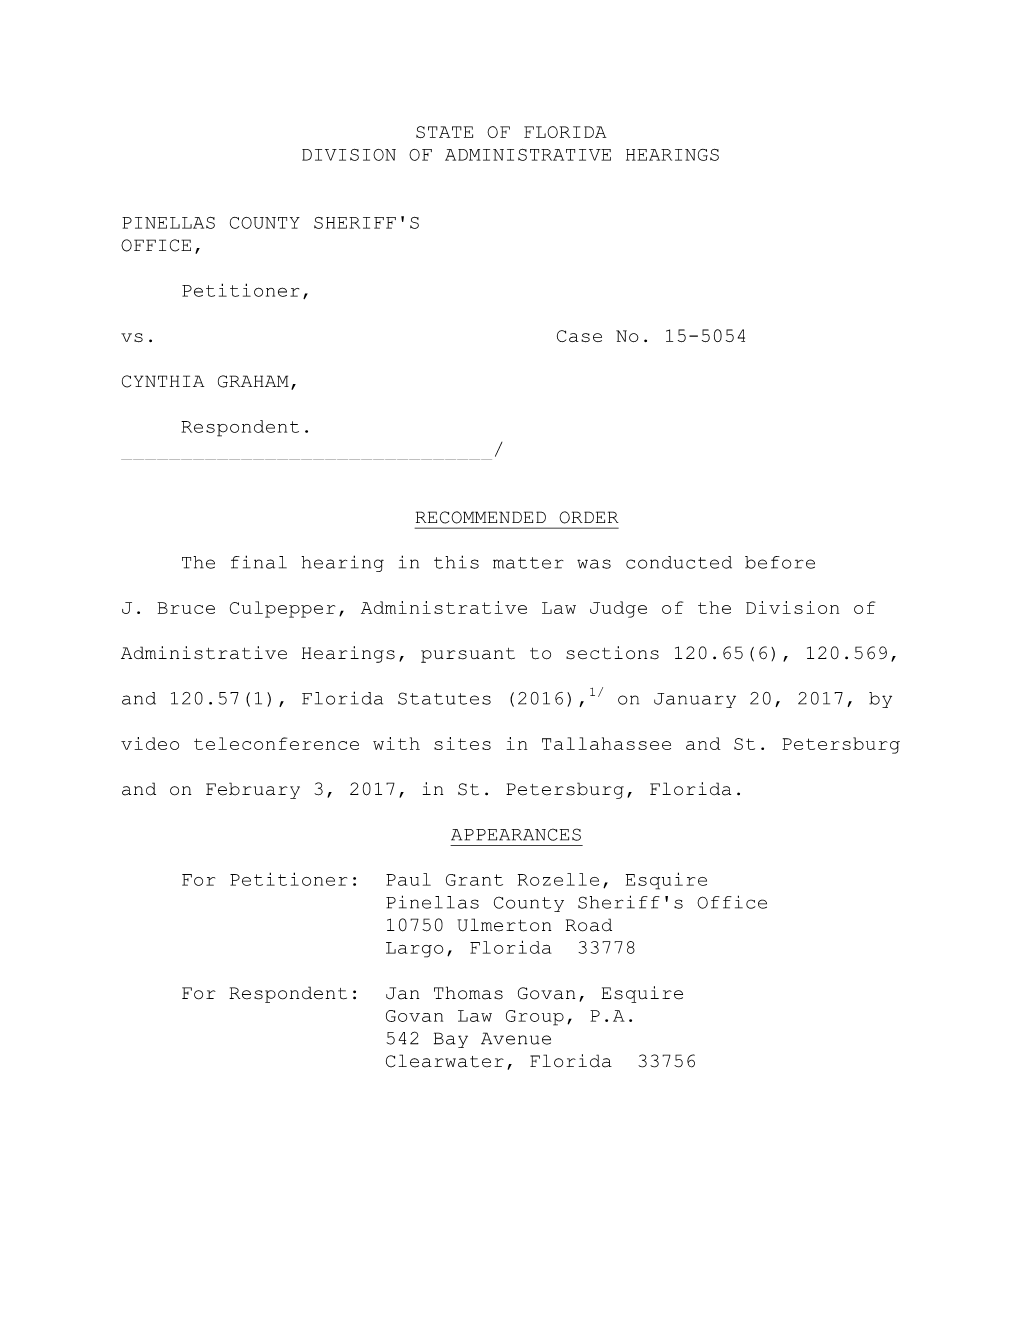 State of Florida Division of Administrative Hearings